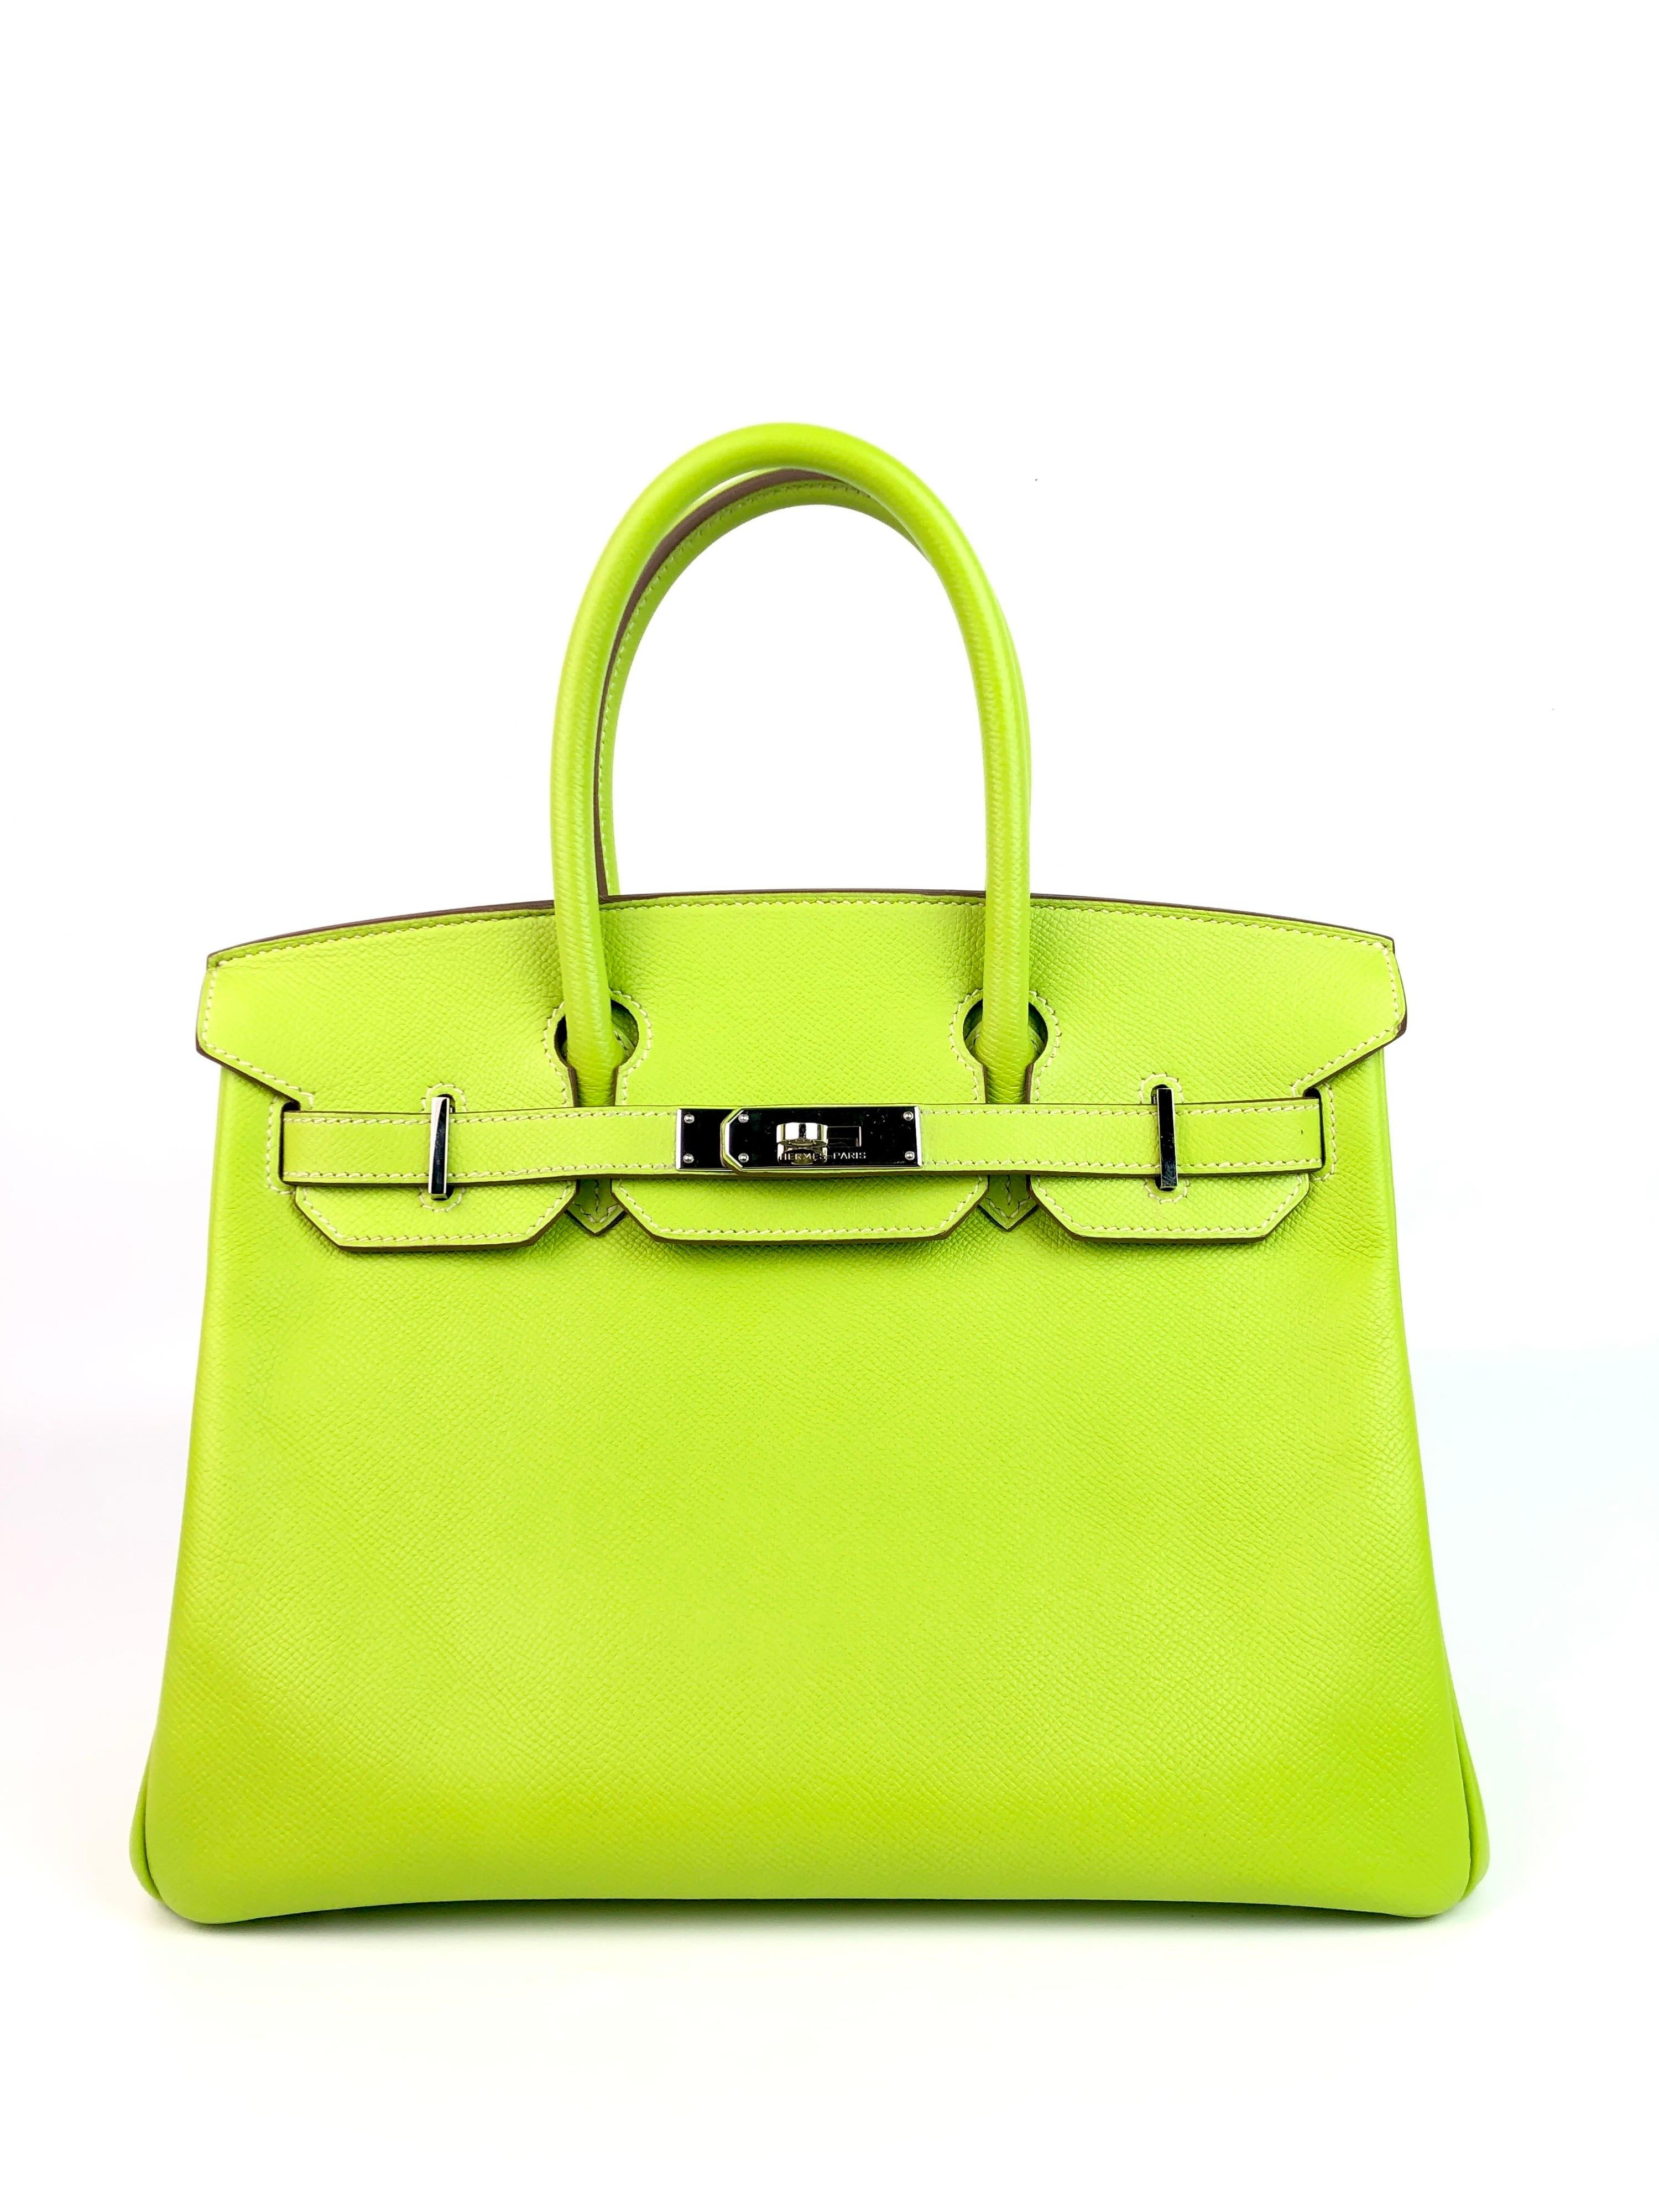 Hermes Birkin 30 Kiwi Linchen Green Candy Collection Palladium Hardware. Excellent Condition, light hairlines on Hardware, Excellent corners and structure. 

Shop with Confidence from Lux Addicts. Authenticity Guaranteed! 